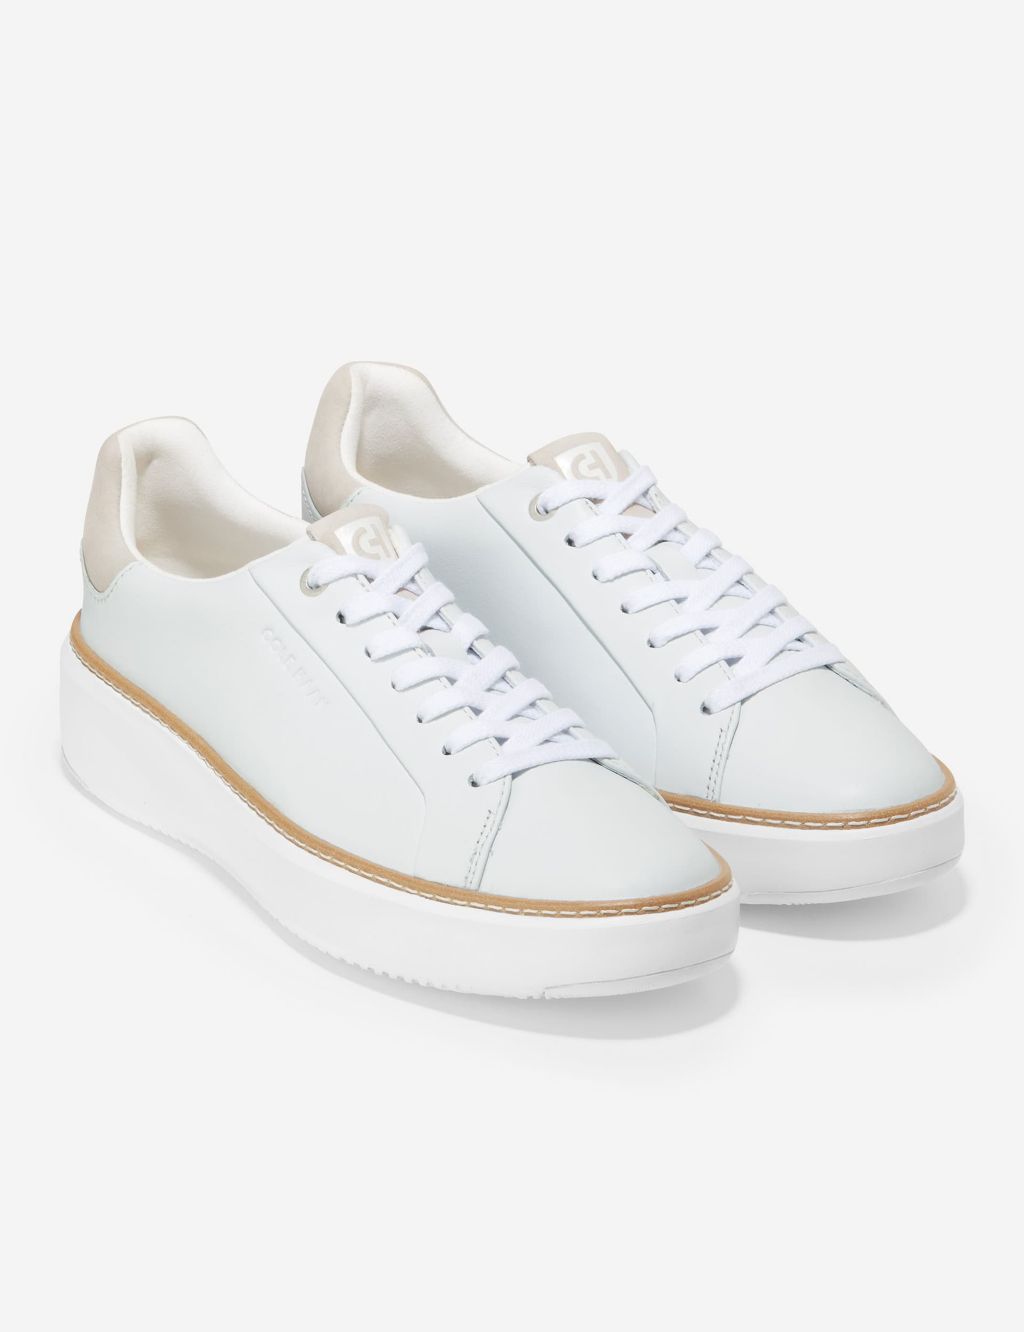 Grandpro Topspin Leather Lace Up Trainers image 2